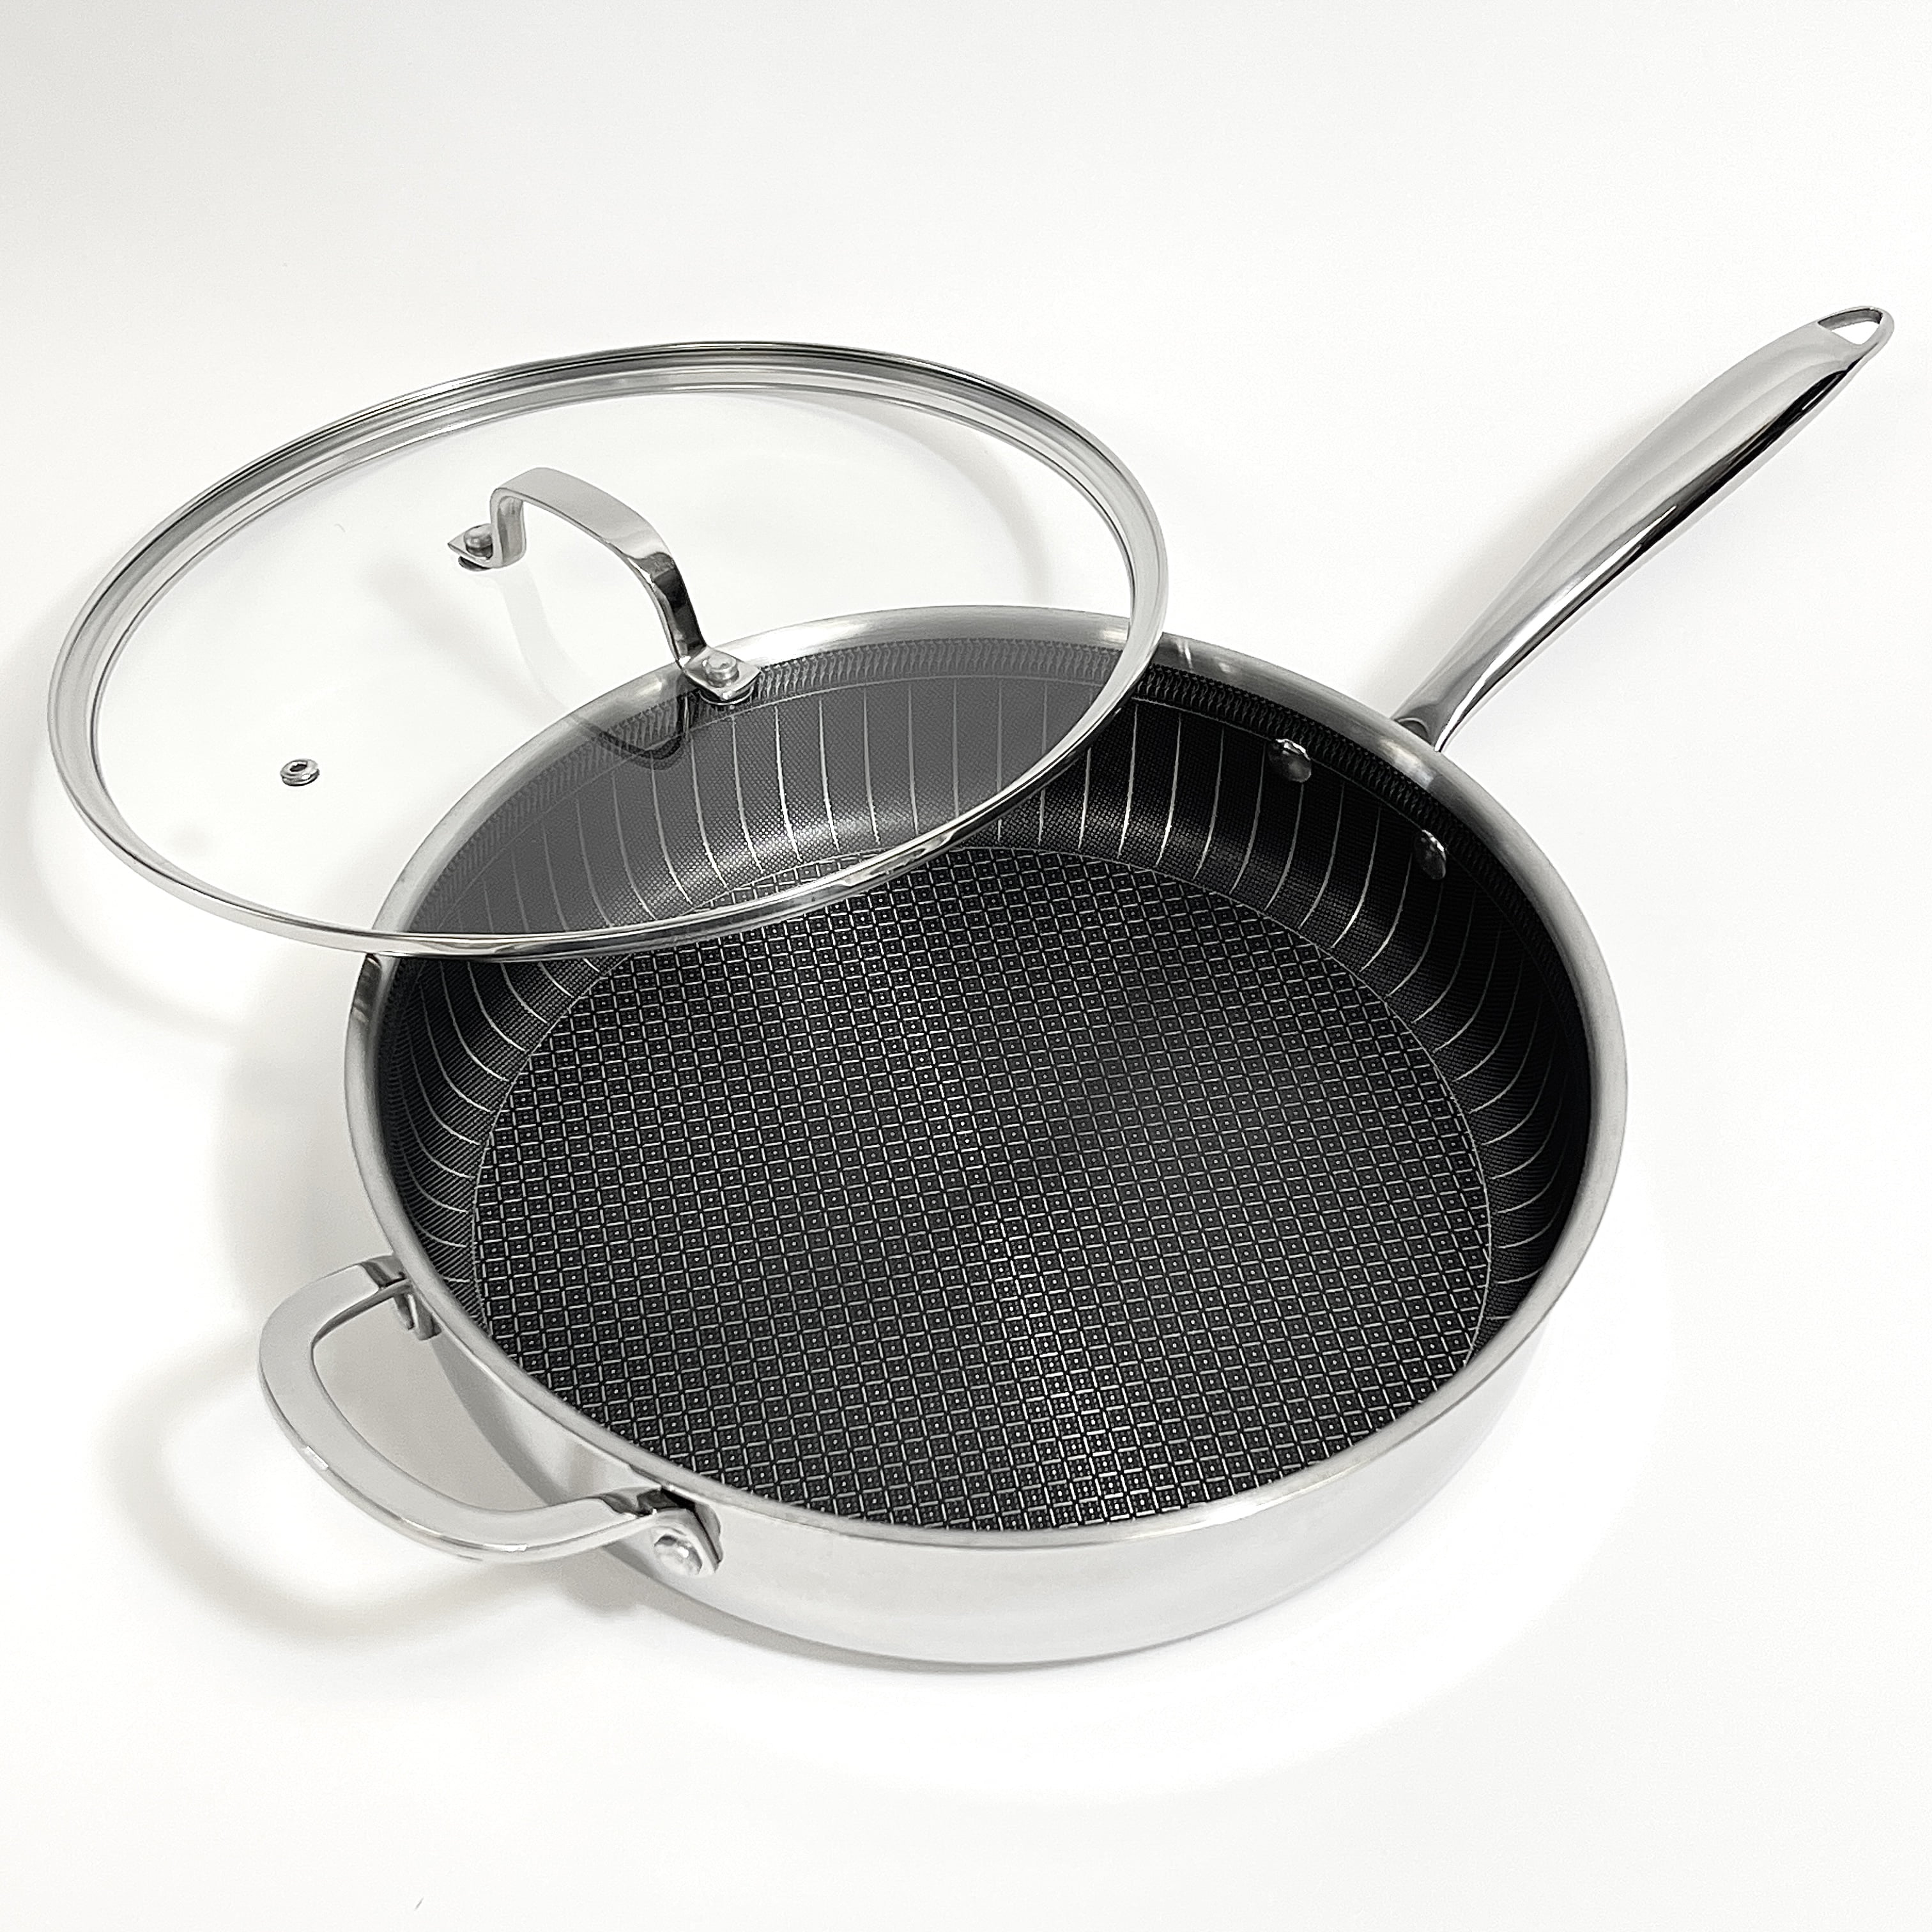 12 Stainless Steel 3-Ply Fry Pan – Nonstick